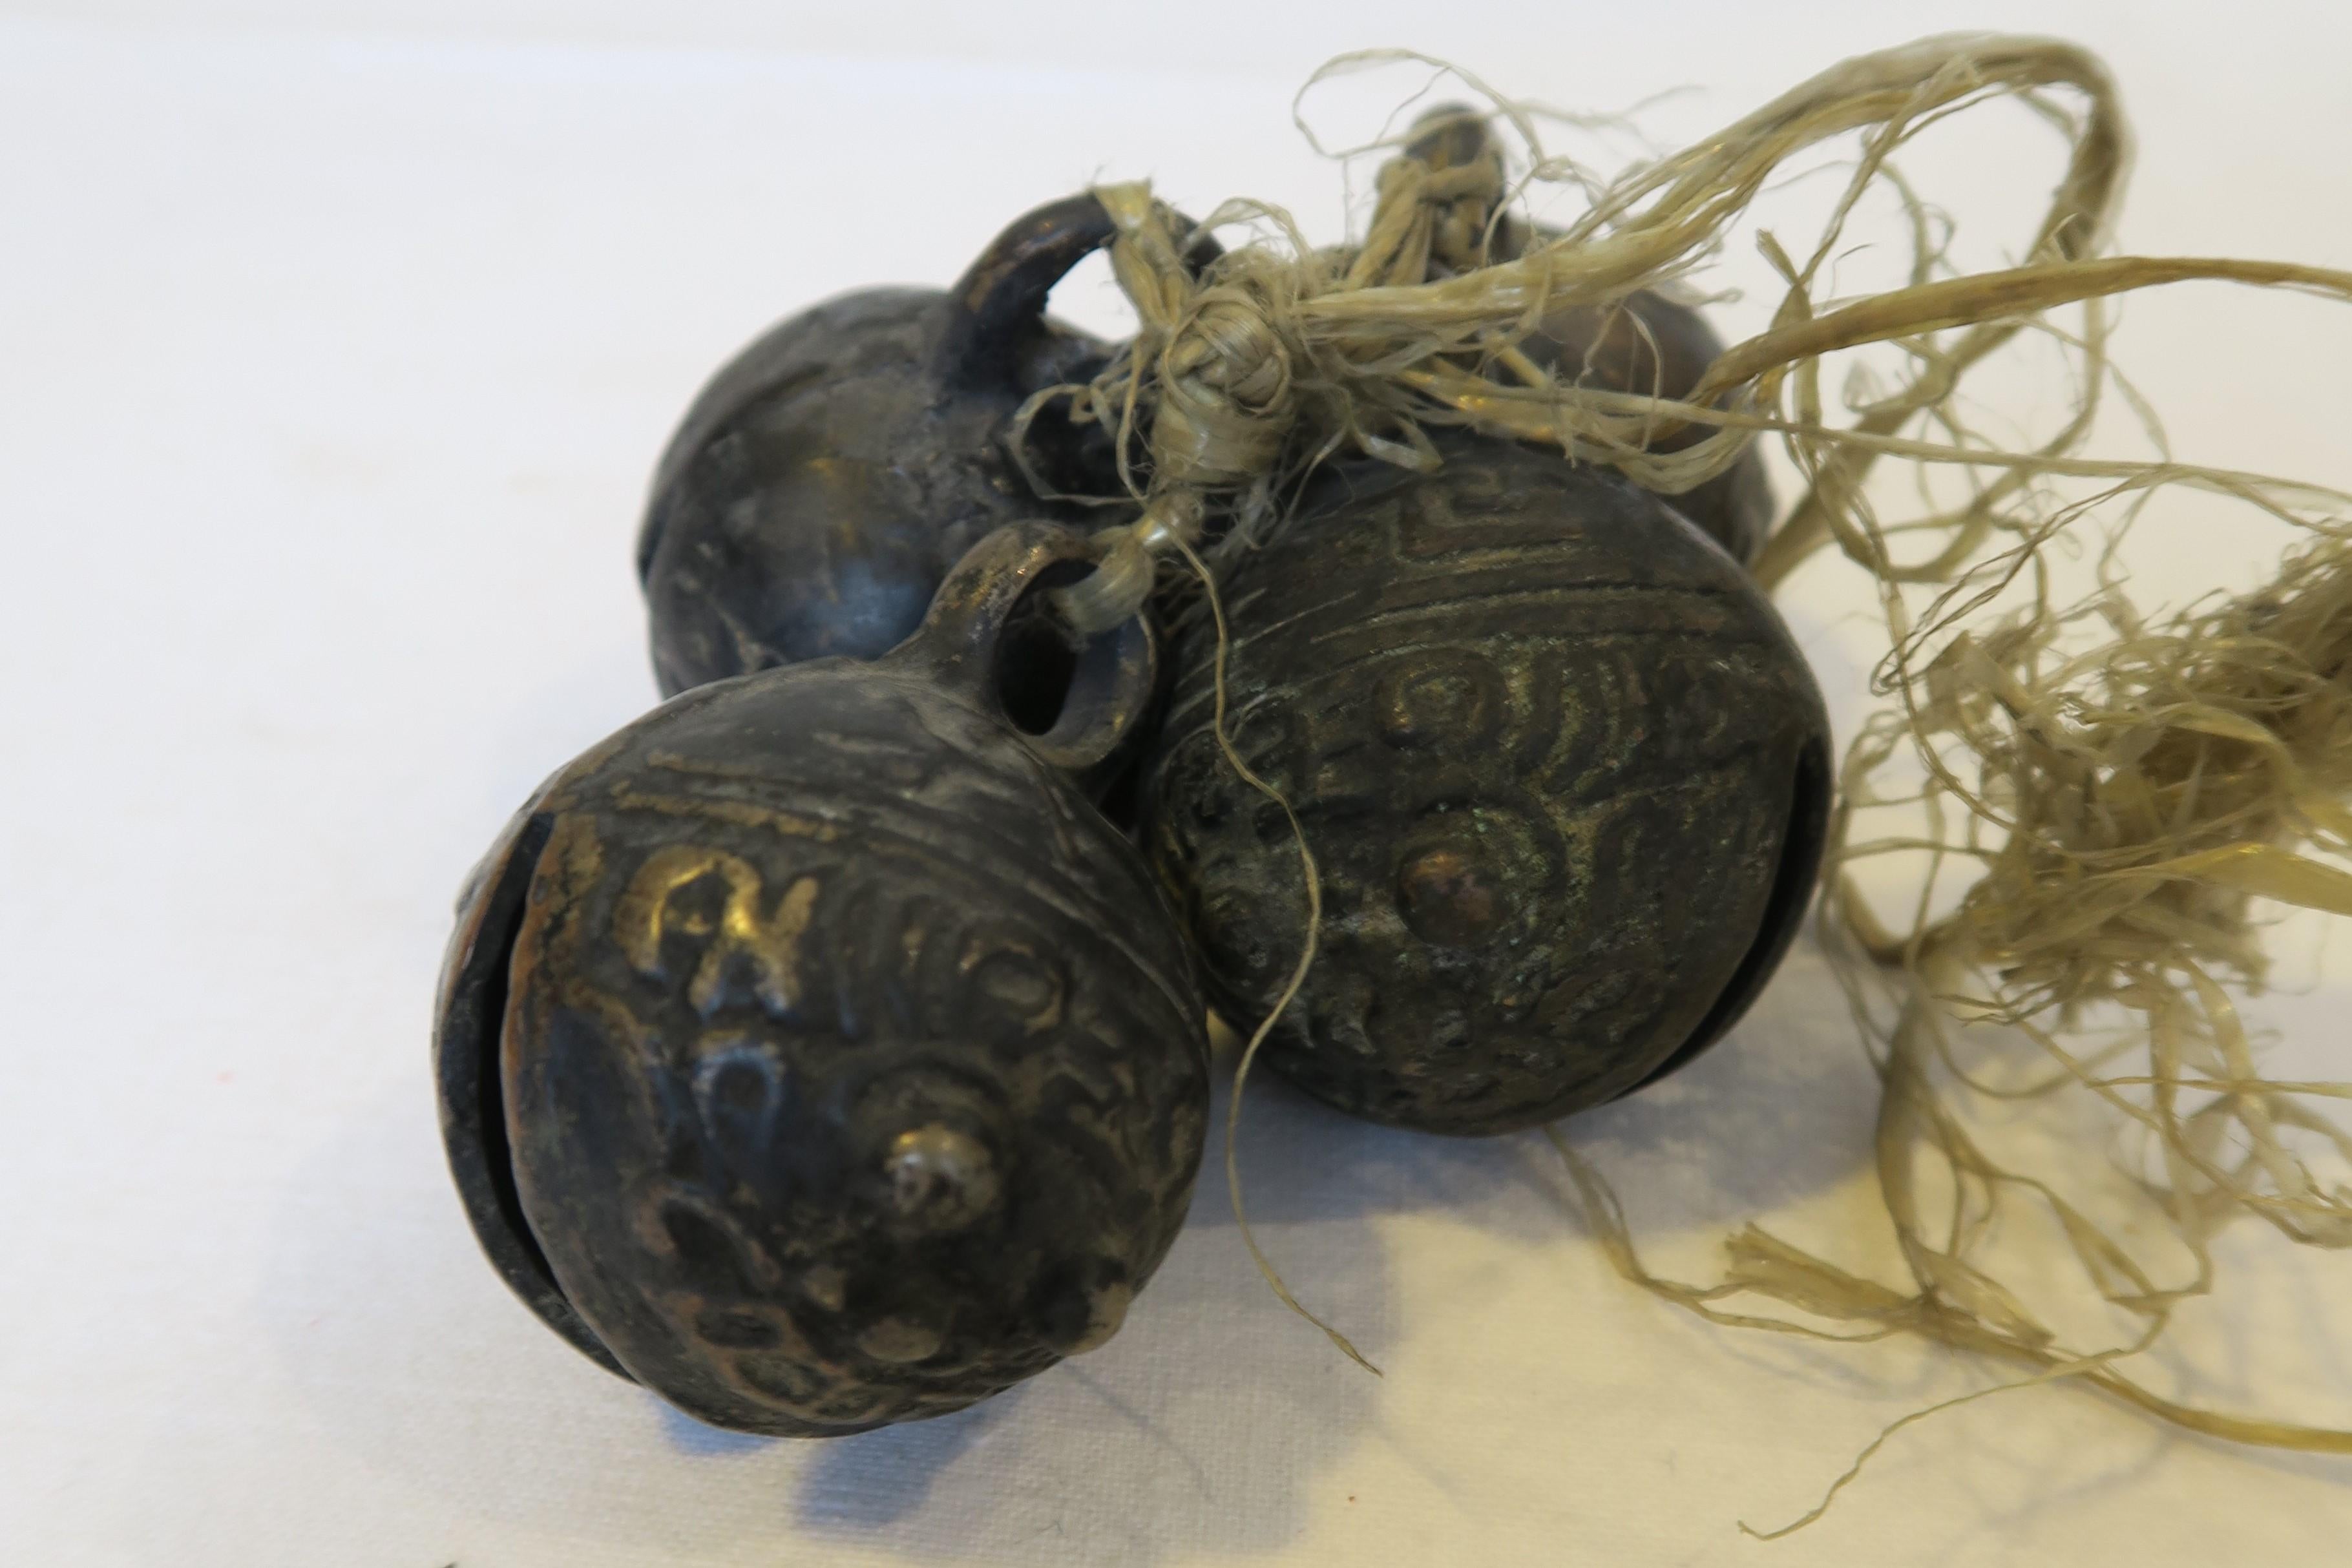 In this ad you get the chance to buy a really rare antique. The object for sale is a bundle of historic goatbells used in Austria and Southern Germany on goats and small live stock when they were led to the mountains for the summer to graze and